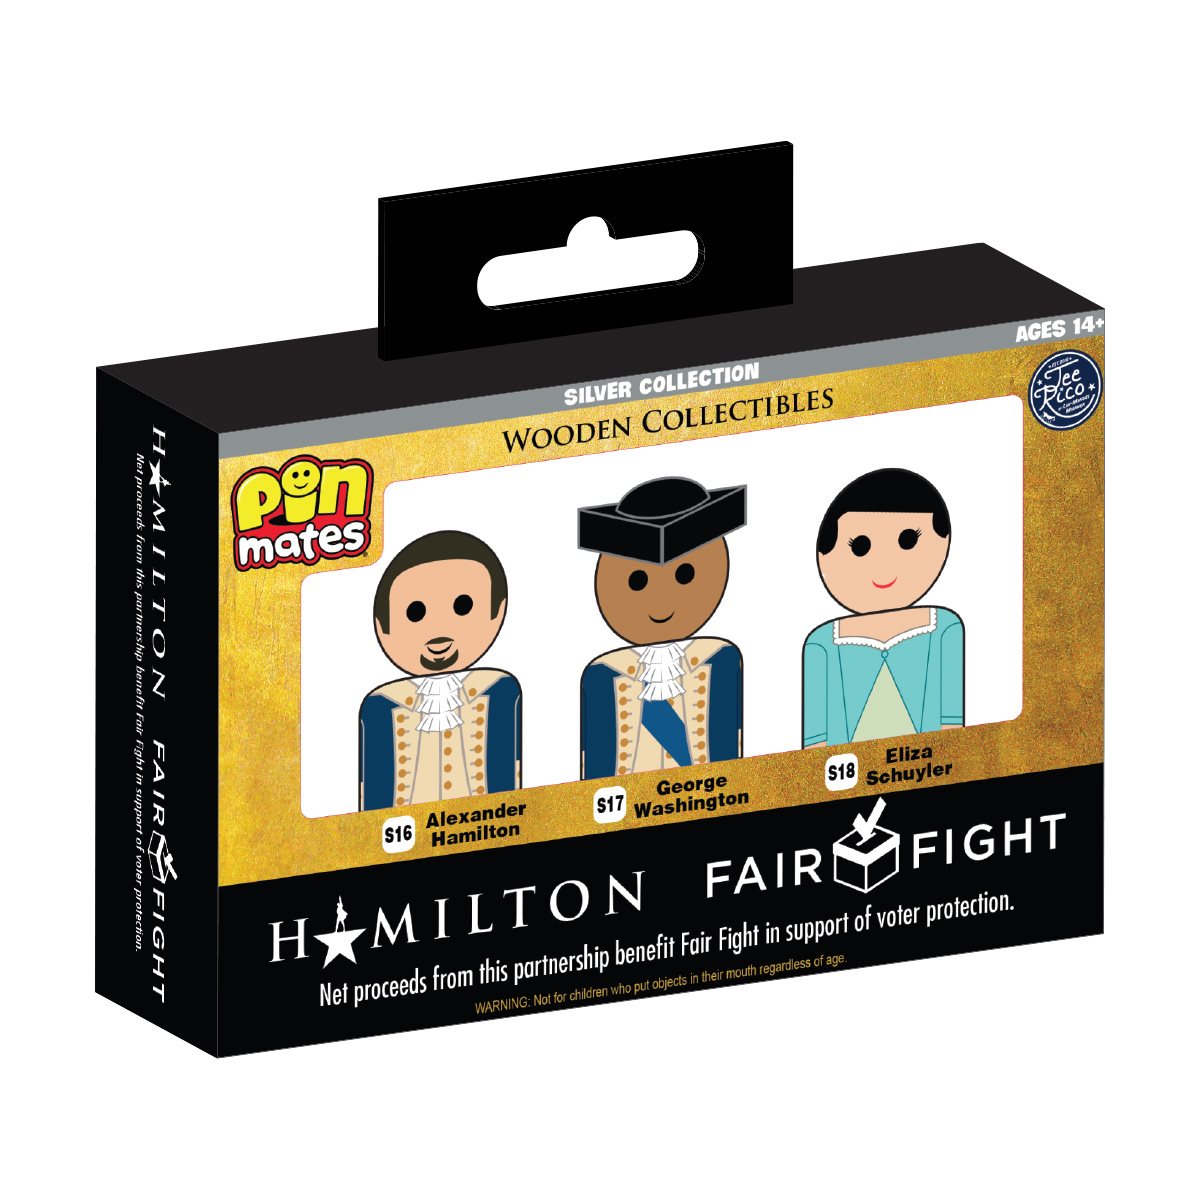 hamilton gifts - Buy hamilton gifts with free shipping on AliExpress